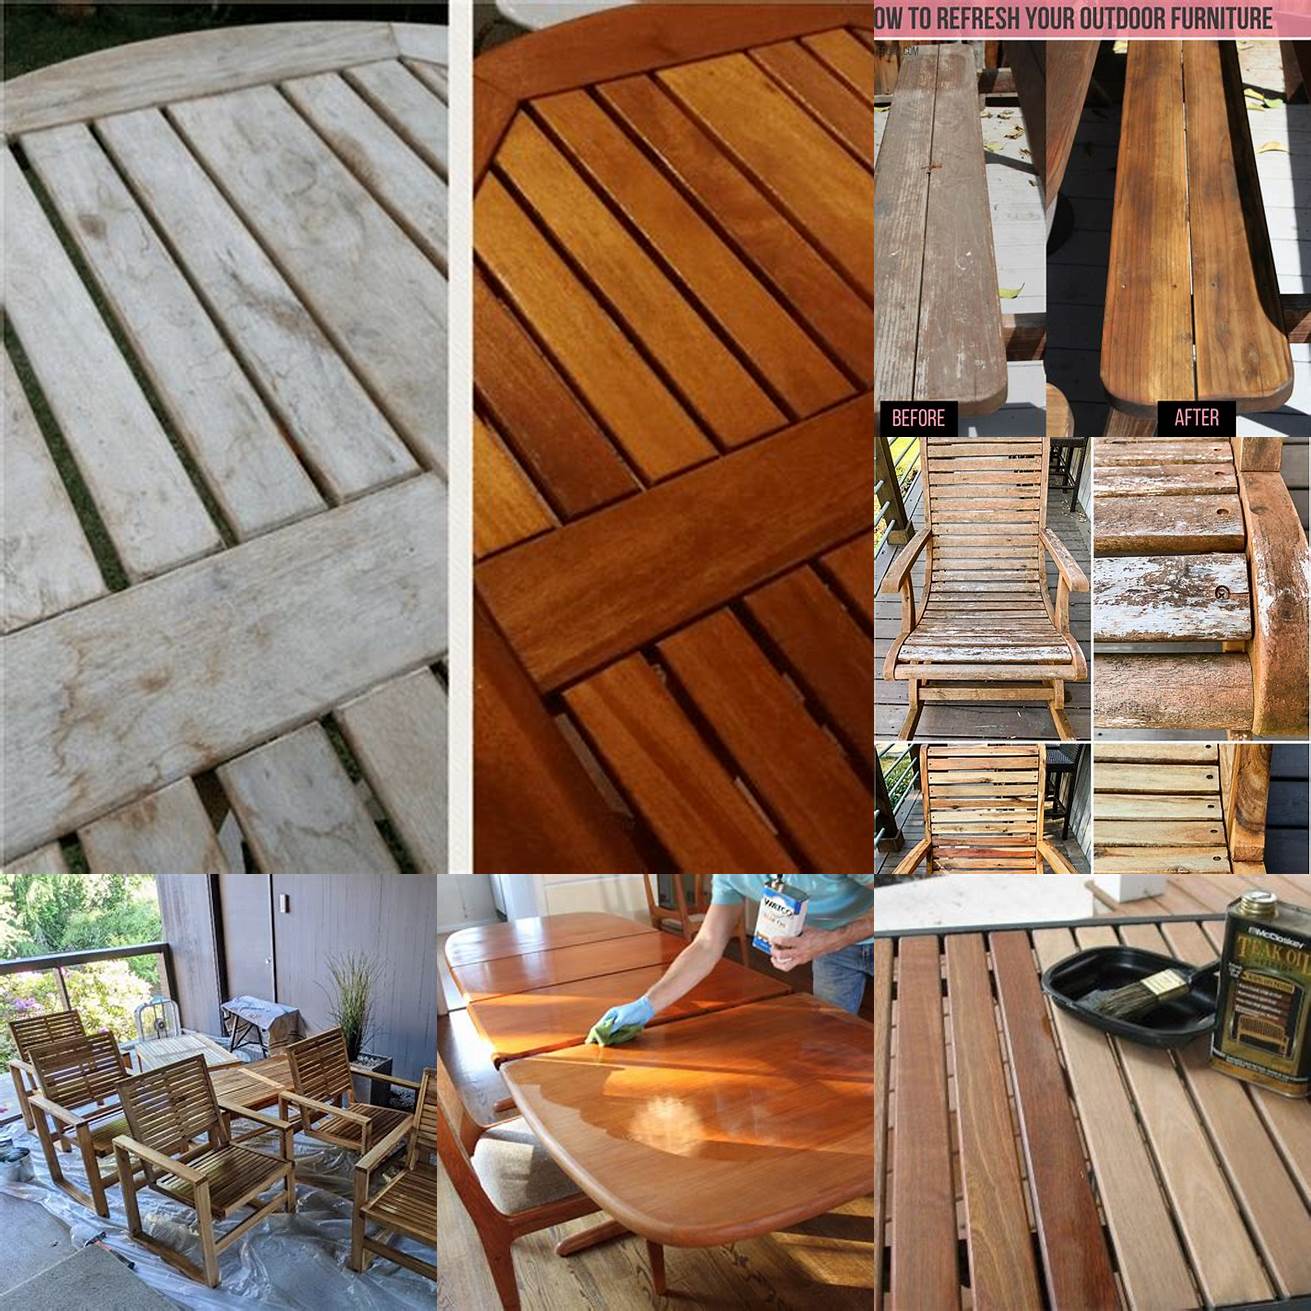 Before and After Teak Oil